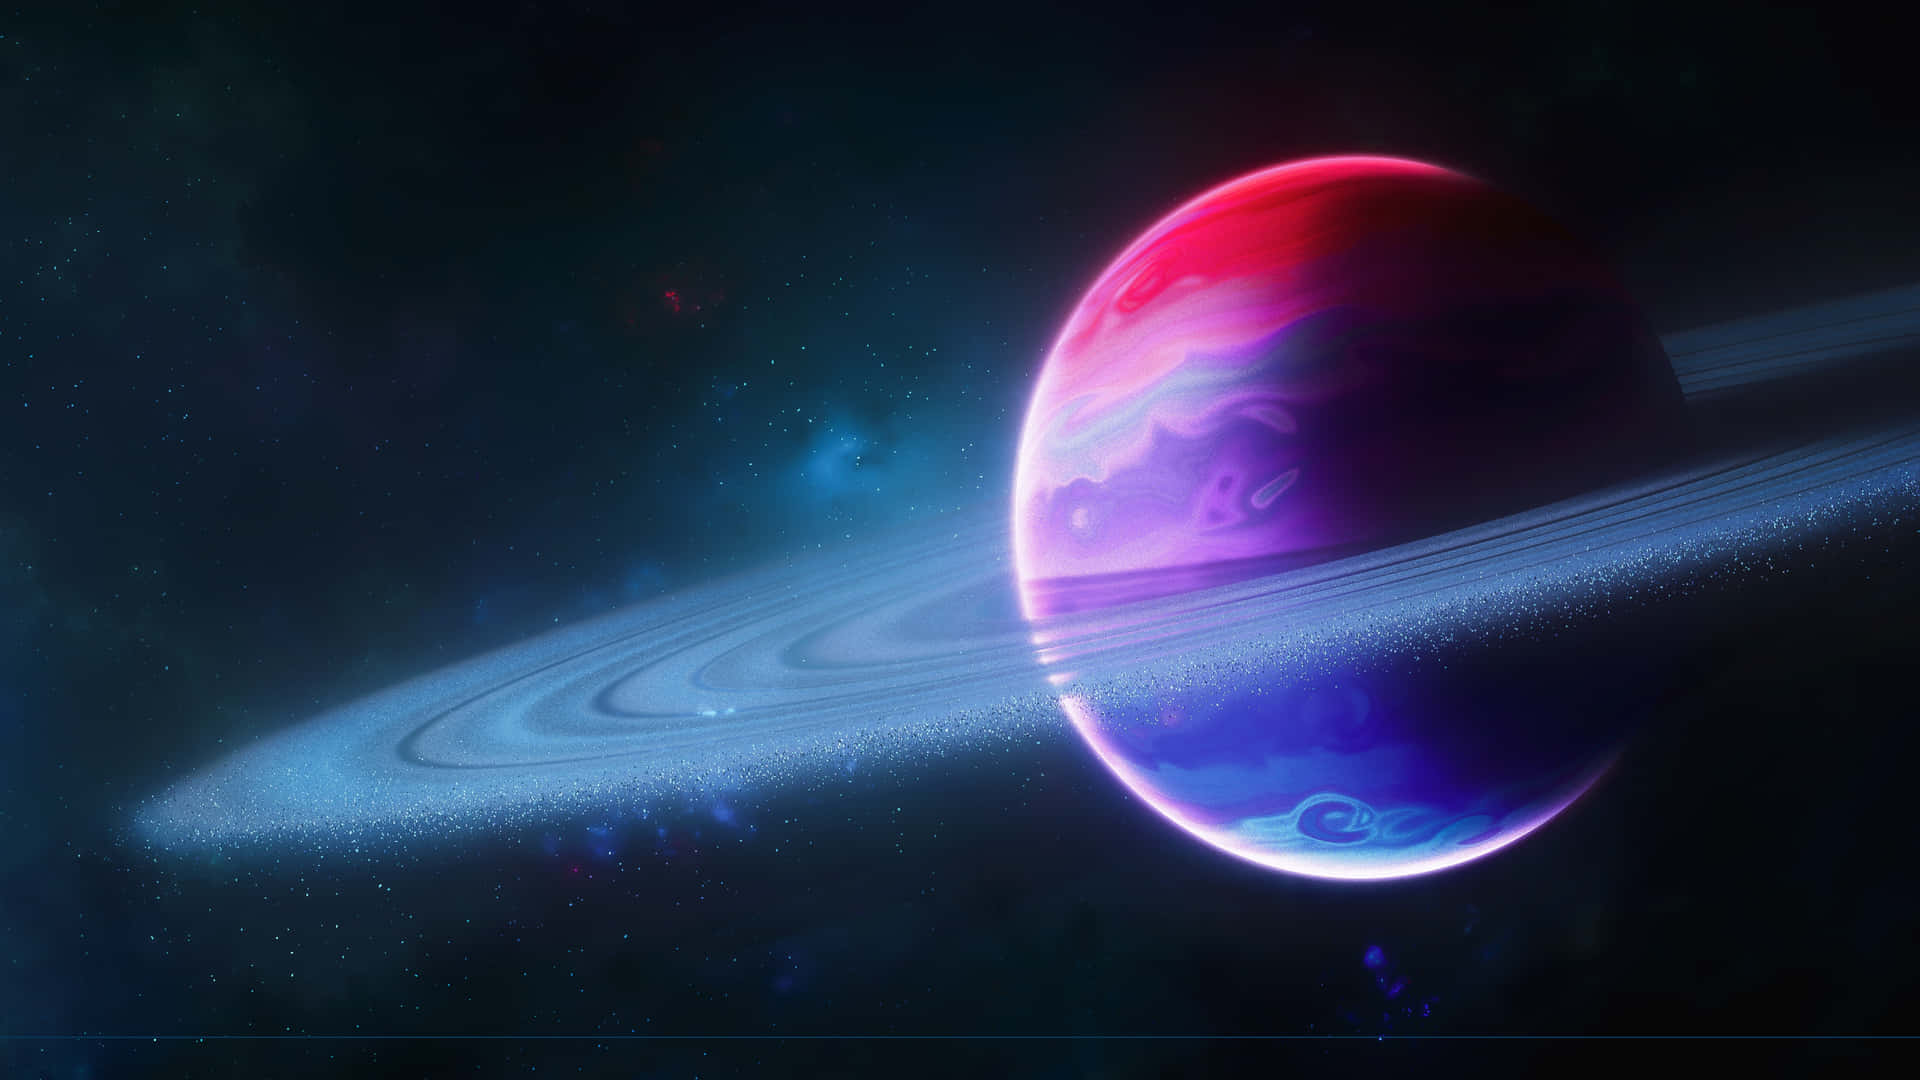 A Saturn In Space With A Red And Blue Ring Background